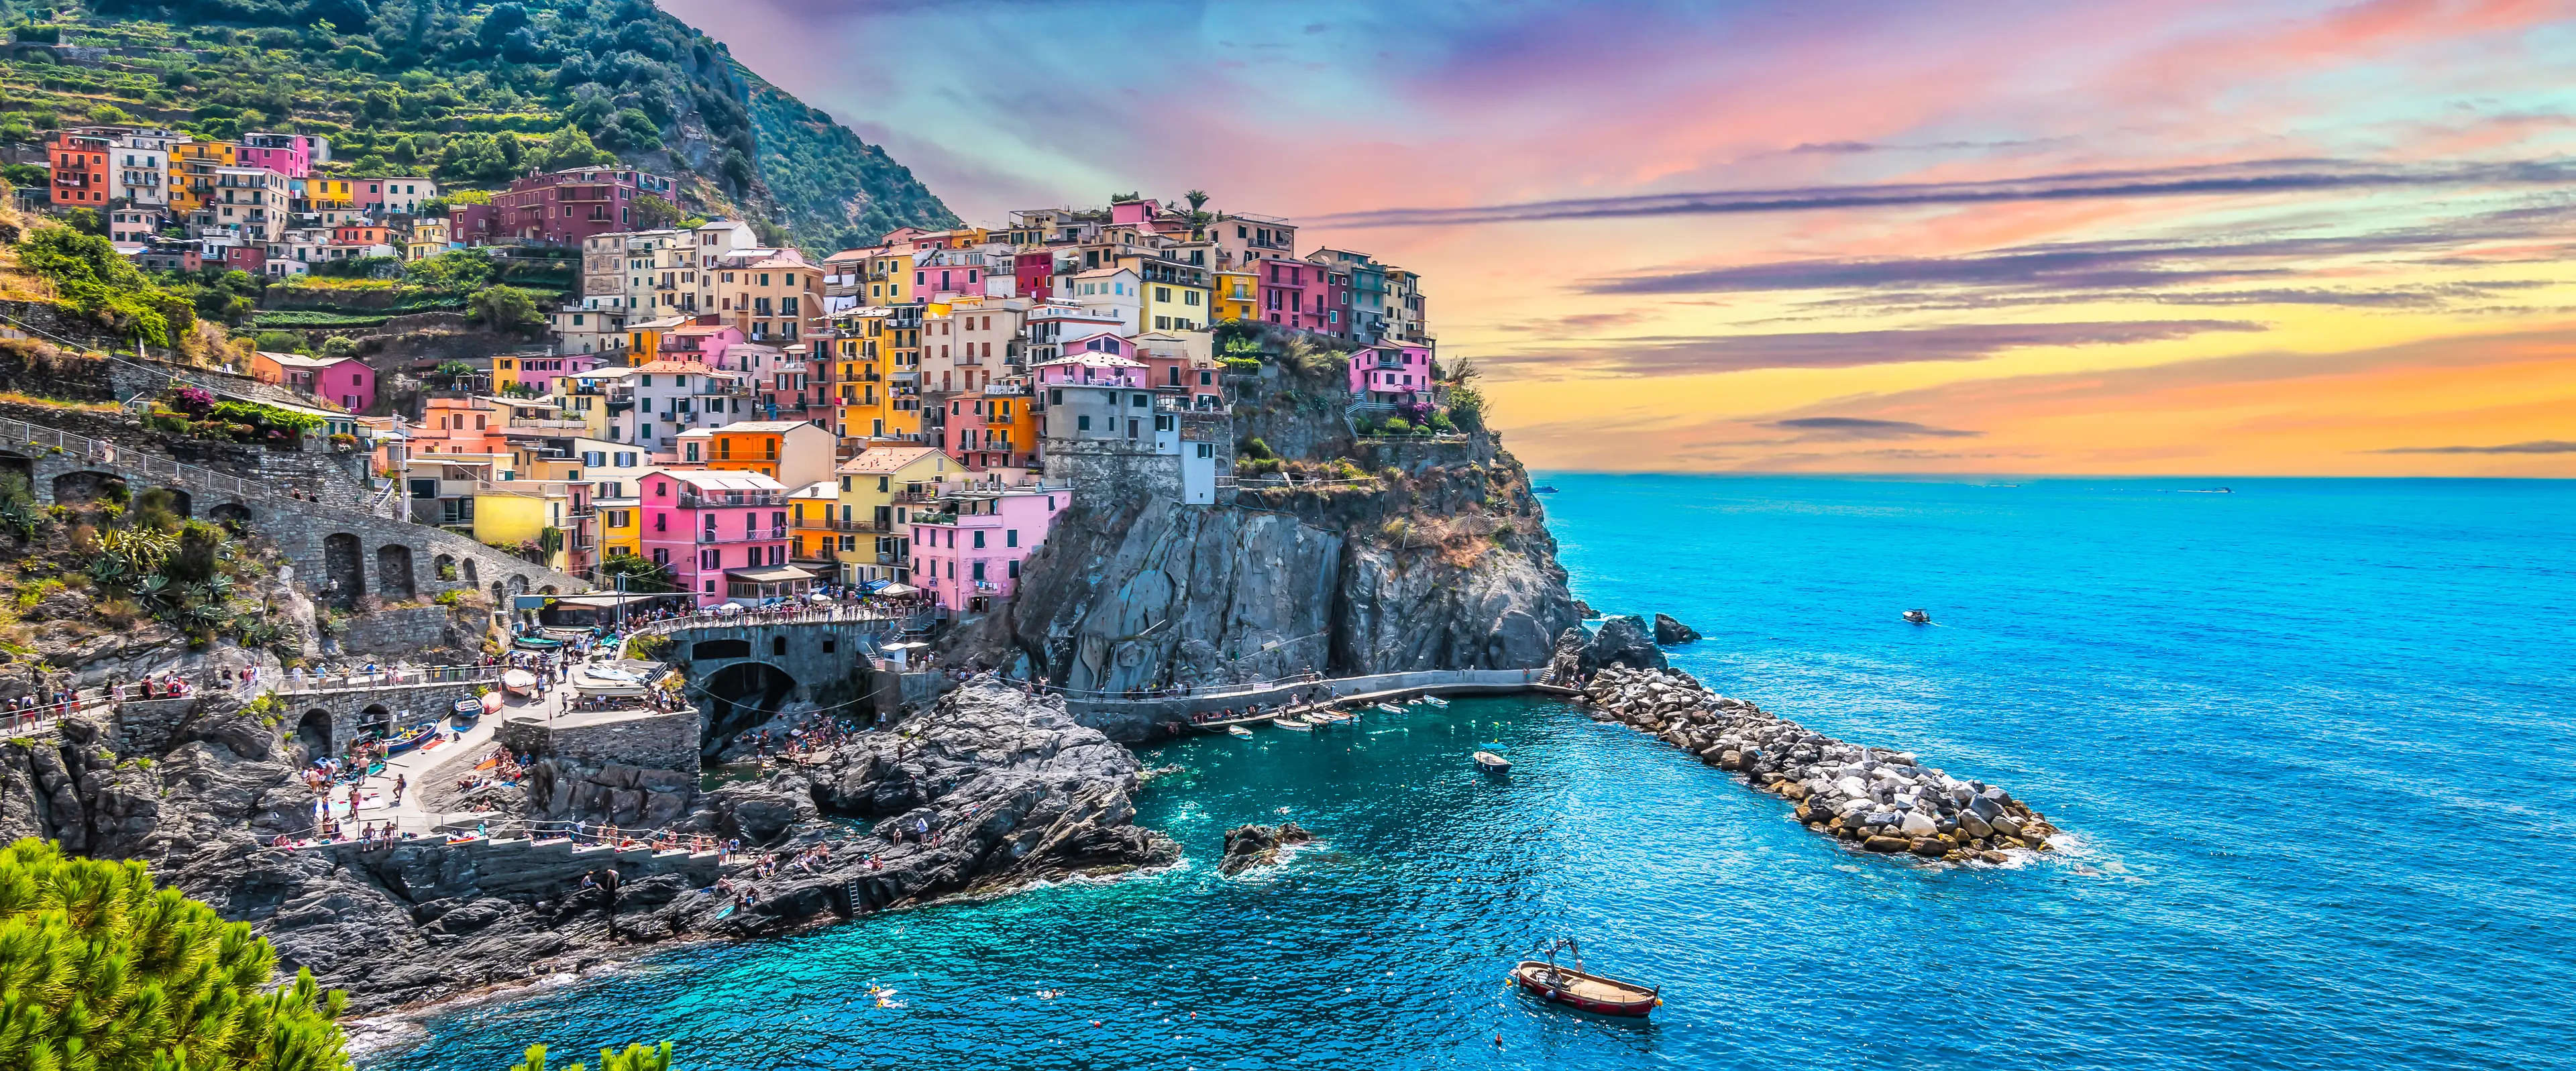 2-Day Local Experience: Shopping, Sightseeing & Wine in Cinque Terre